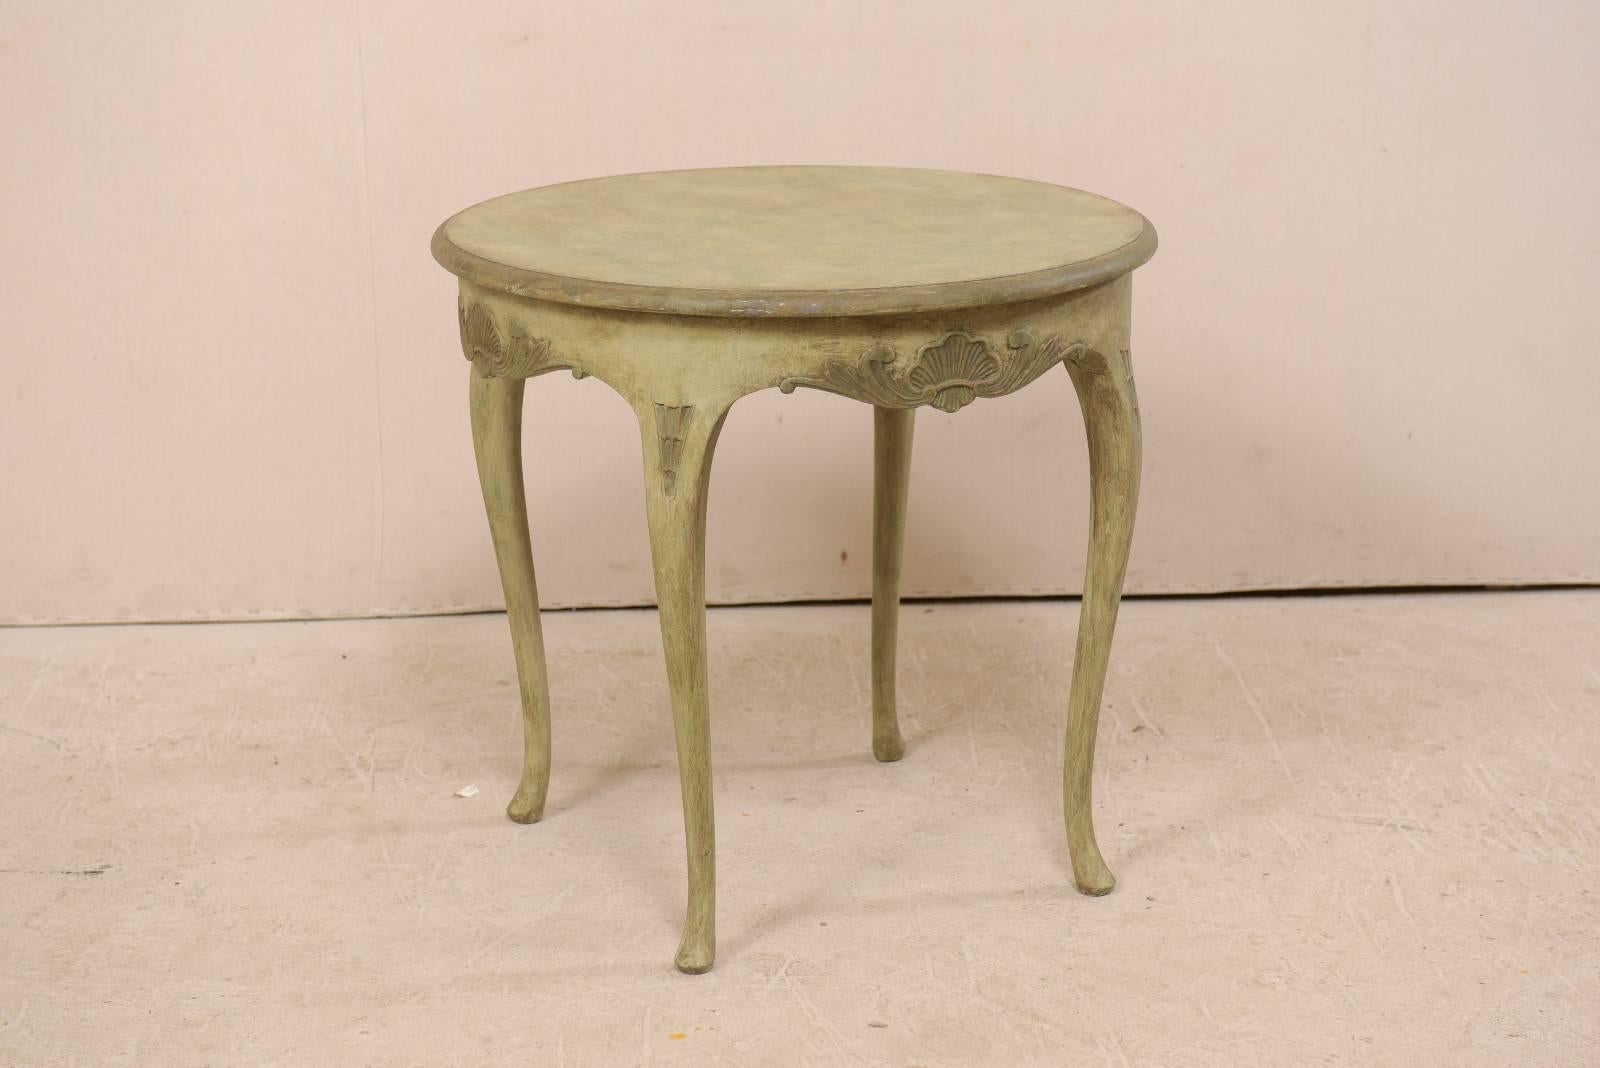 A Swedish Rococo style round painted wood table from the mid-20th century. This vintage Swedish table features a circular-shaped top with nicely carved and gently scalloped apron, adorn with shell and leaf motifs at the skirt's center on all sides,